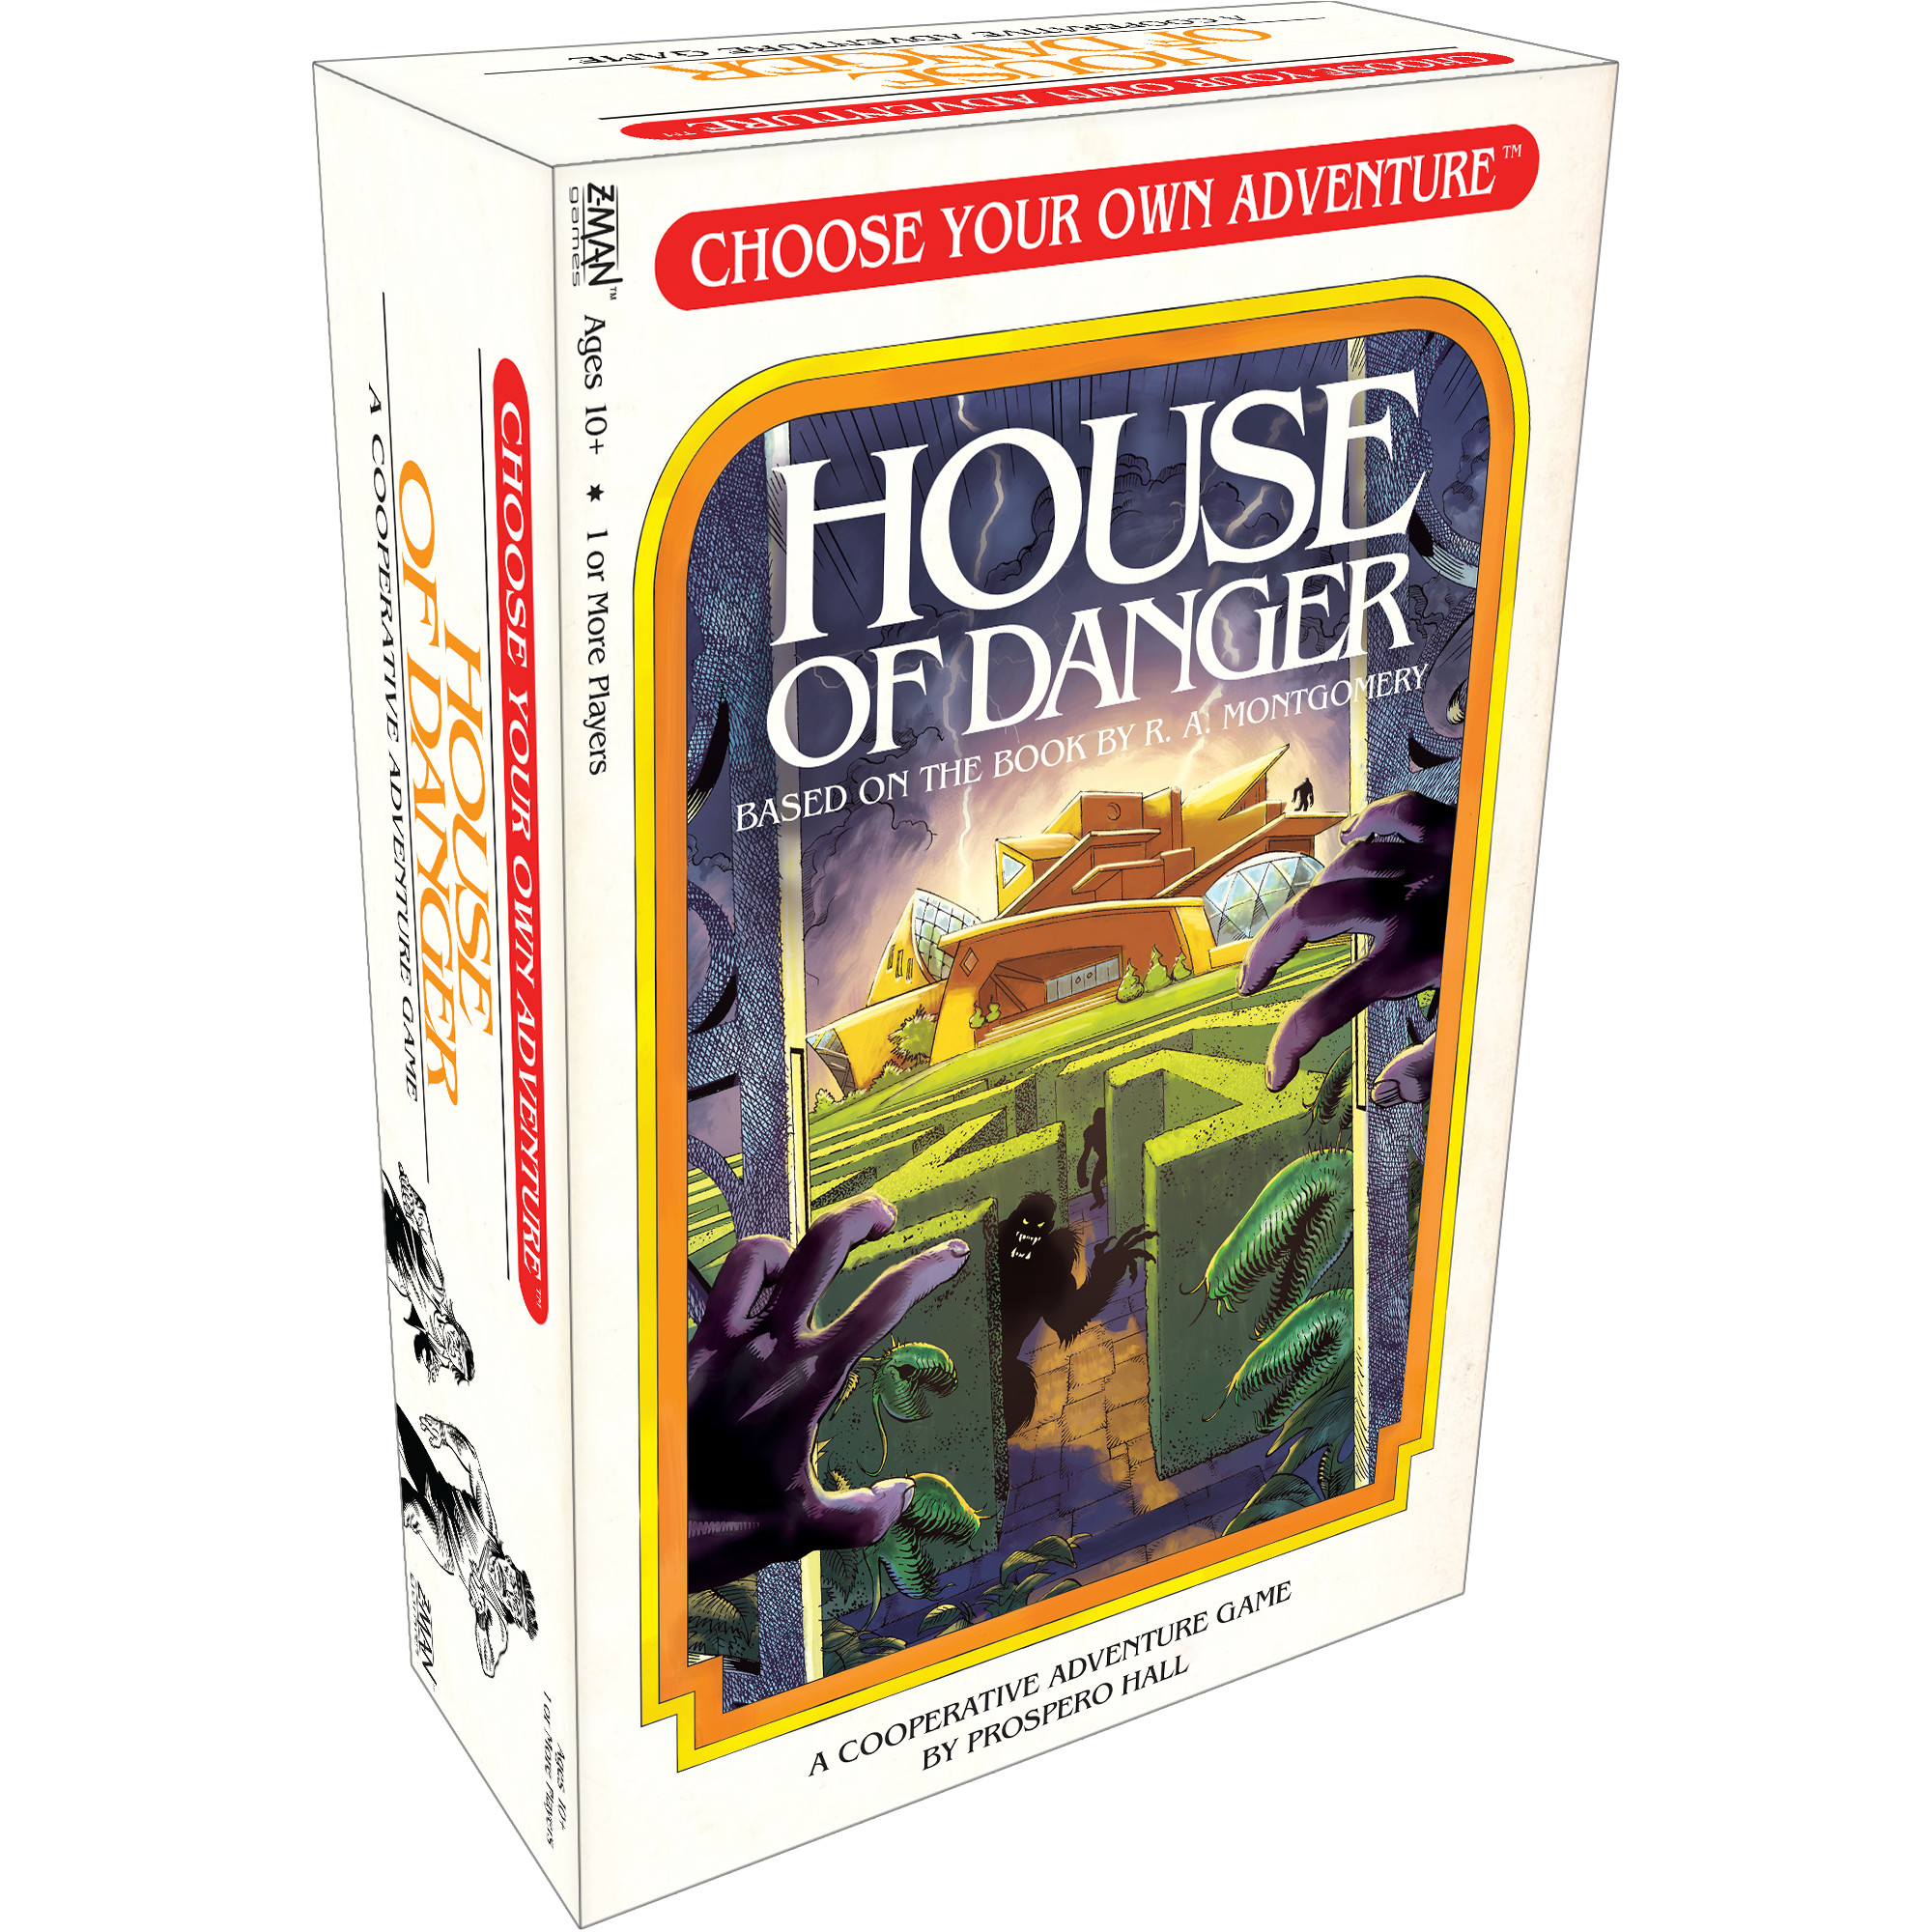 Choose Your Own Adventure: House of Danger Narrative Board Game for Ages 10 and up, from Asmodee - image 1 of 6